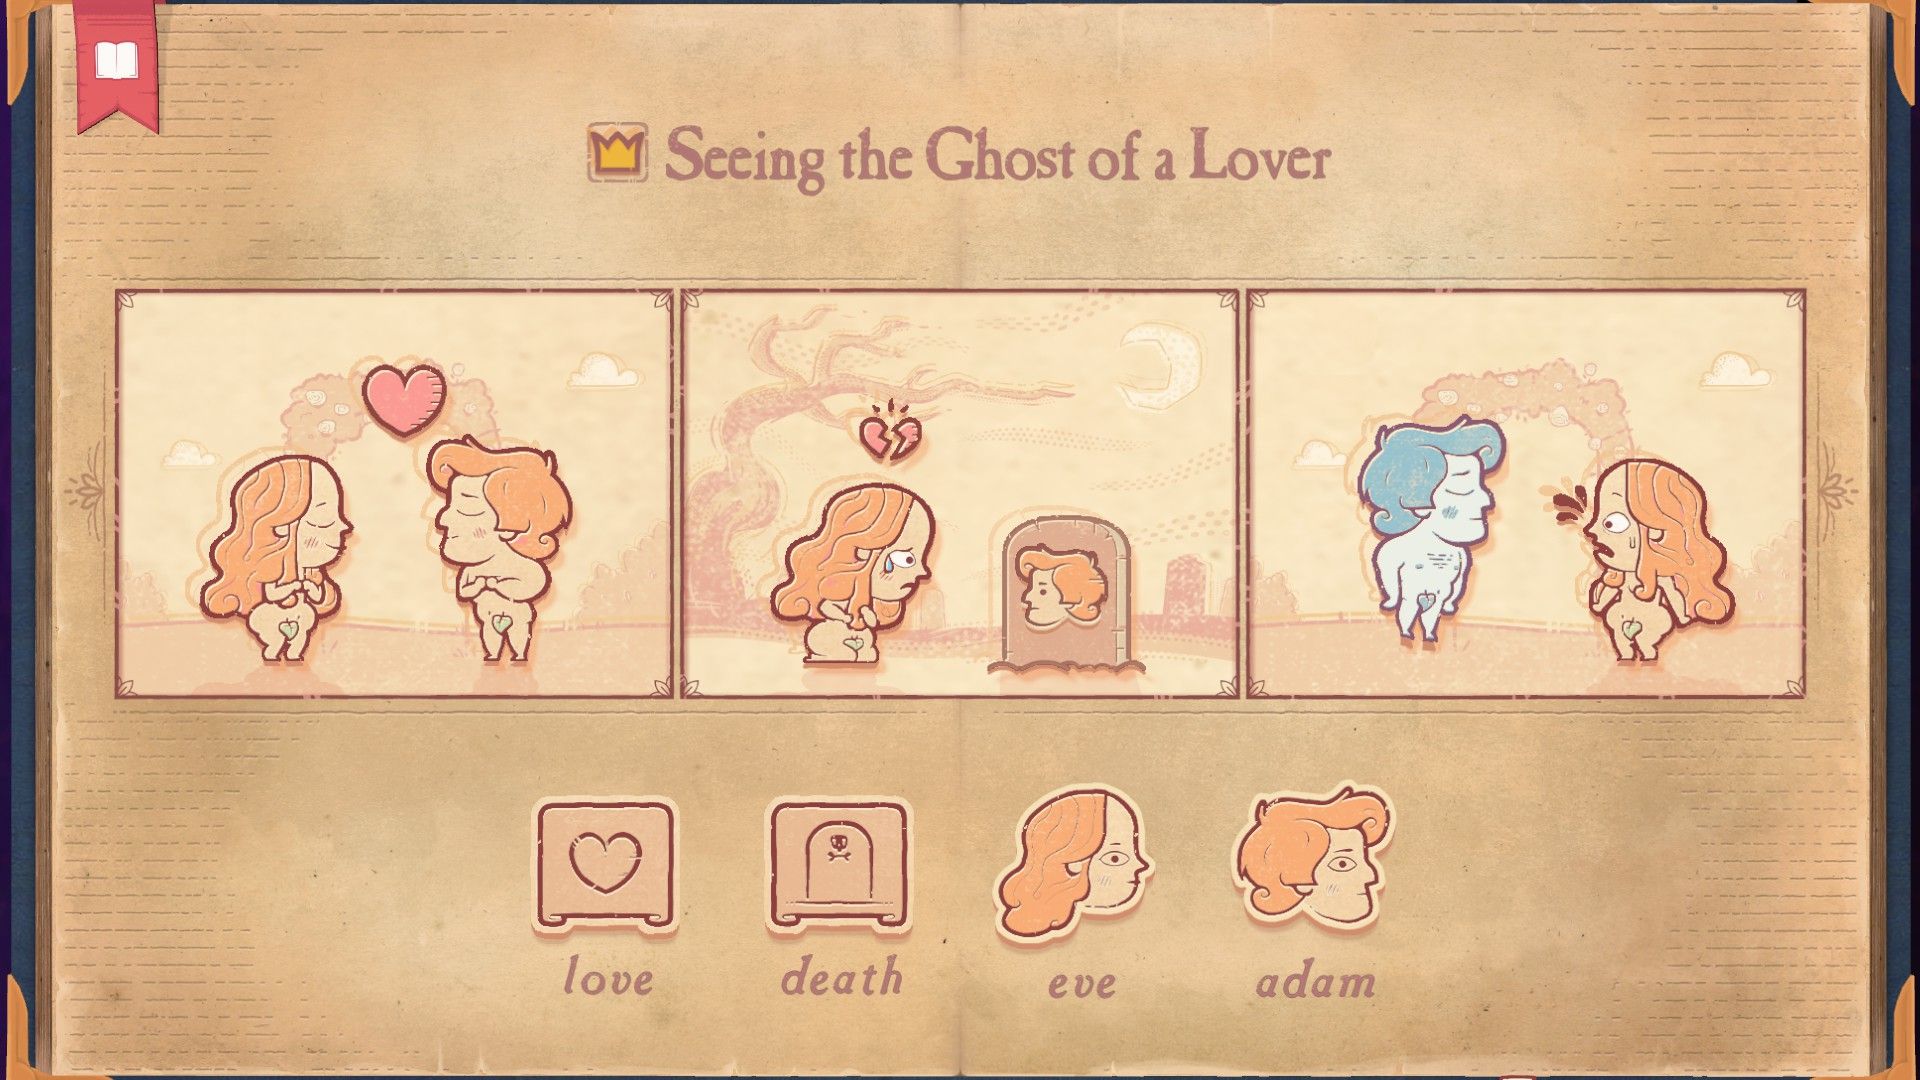 The solution for the Afterlife section of Stoyteller, showing one seeing the ghost of a lover.